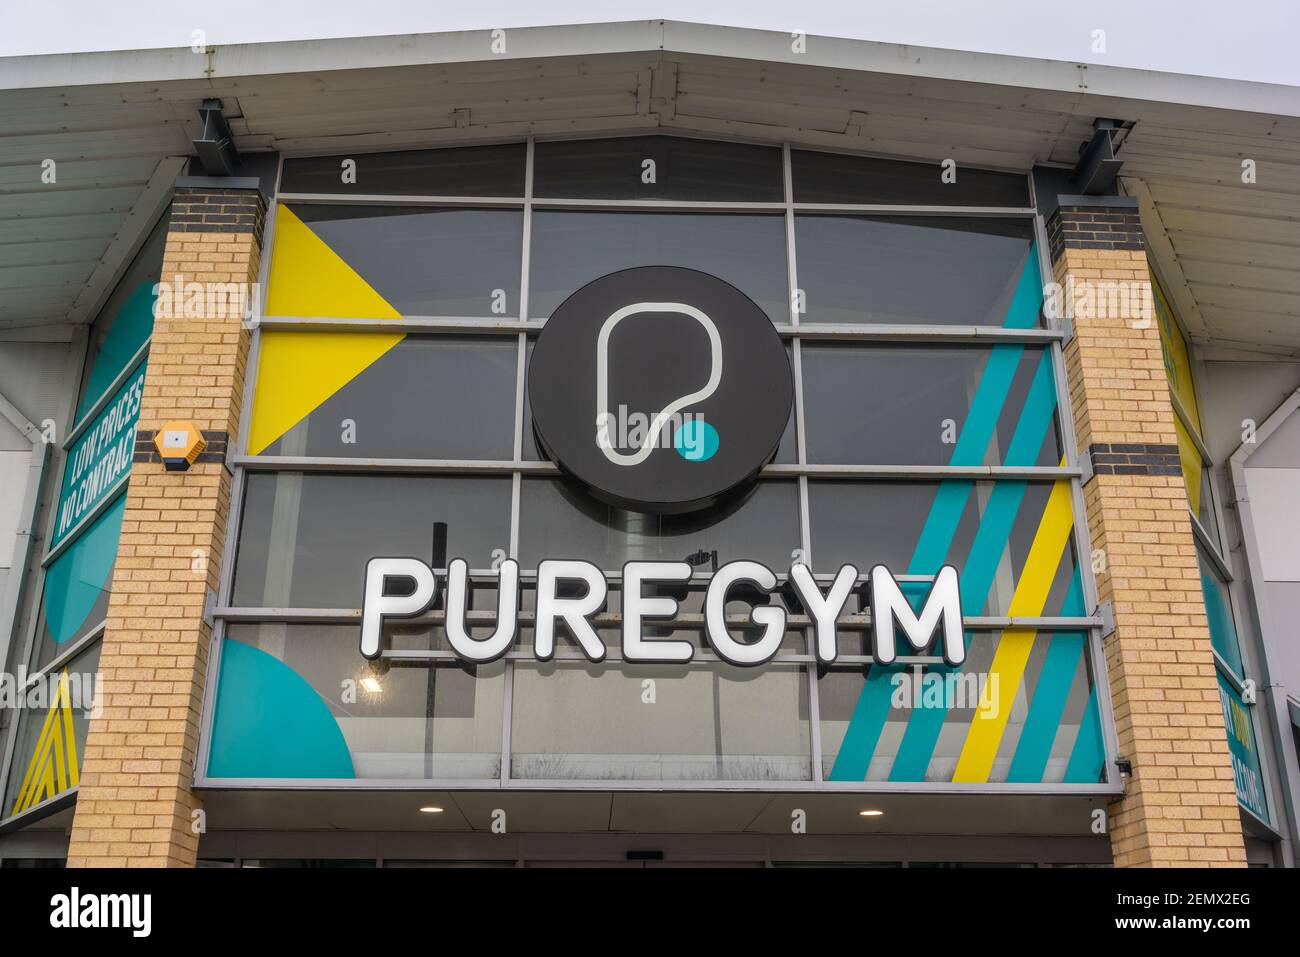 Puregym sign above the entrance to the Puregym gym in Southampton, England, UK Stock Photo